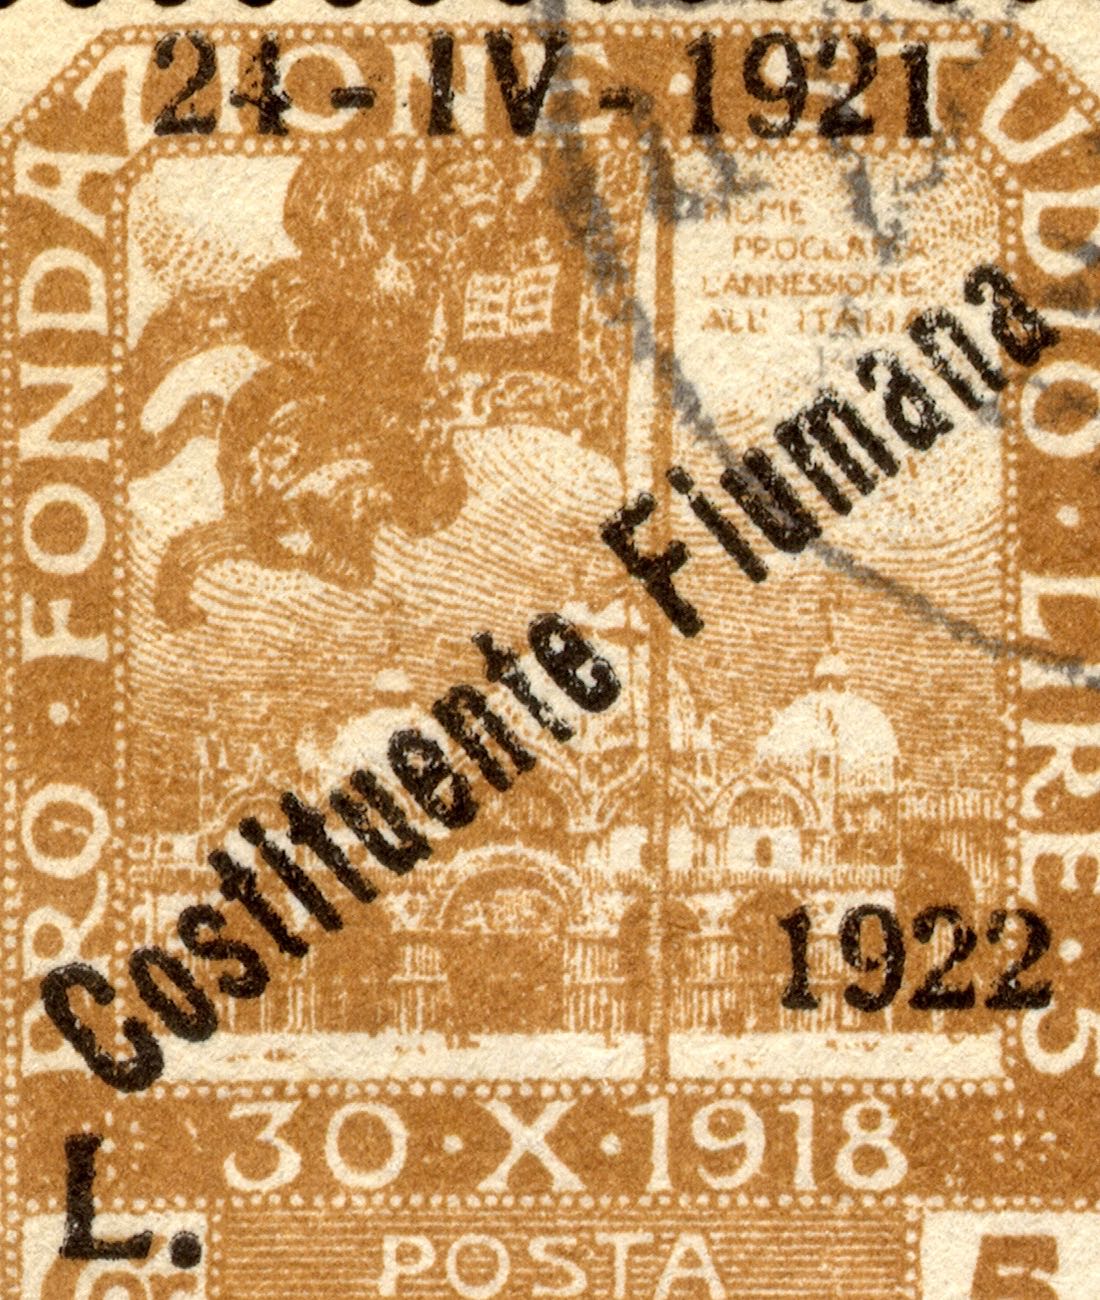 fiume_1919_student_fund_costituente_fiumana_forgery2